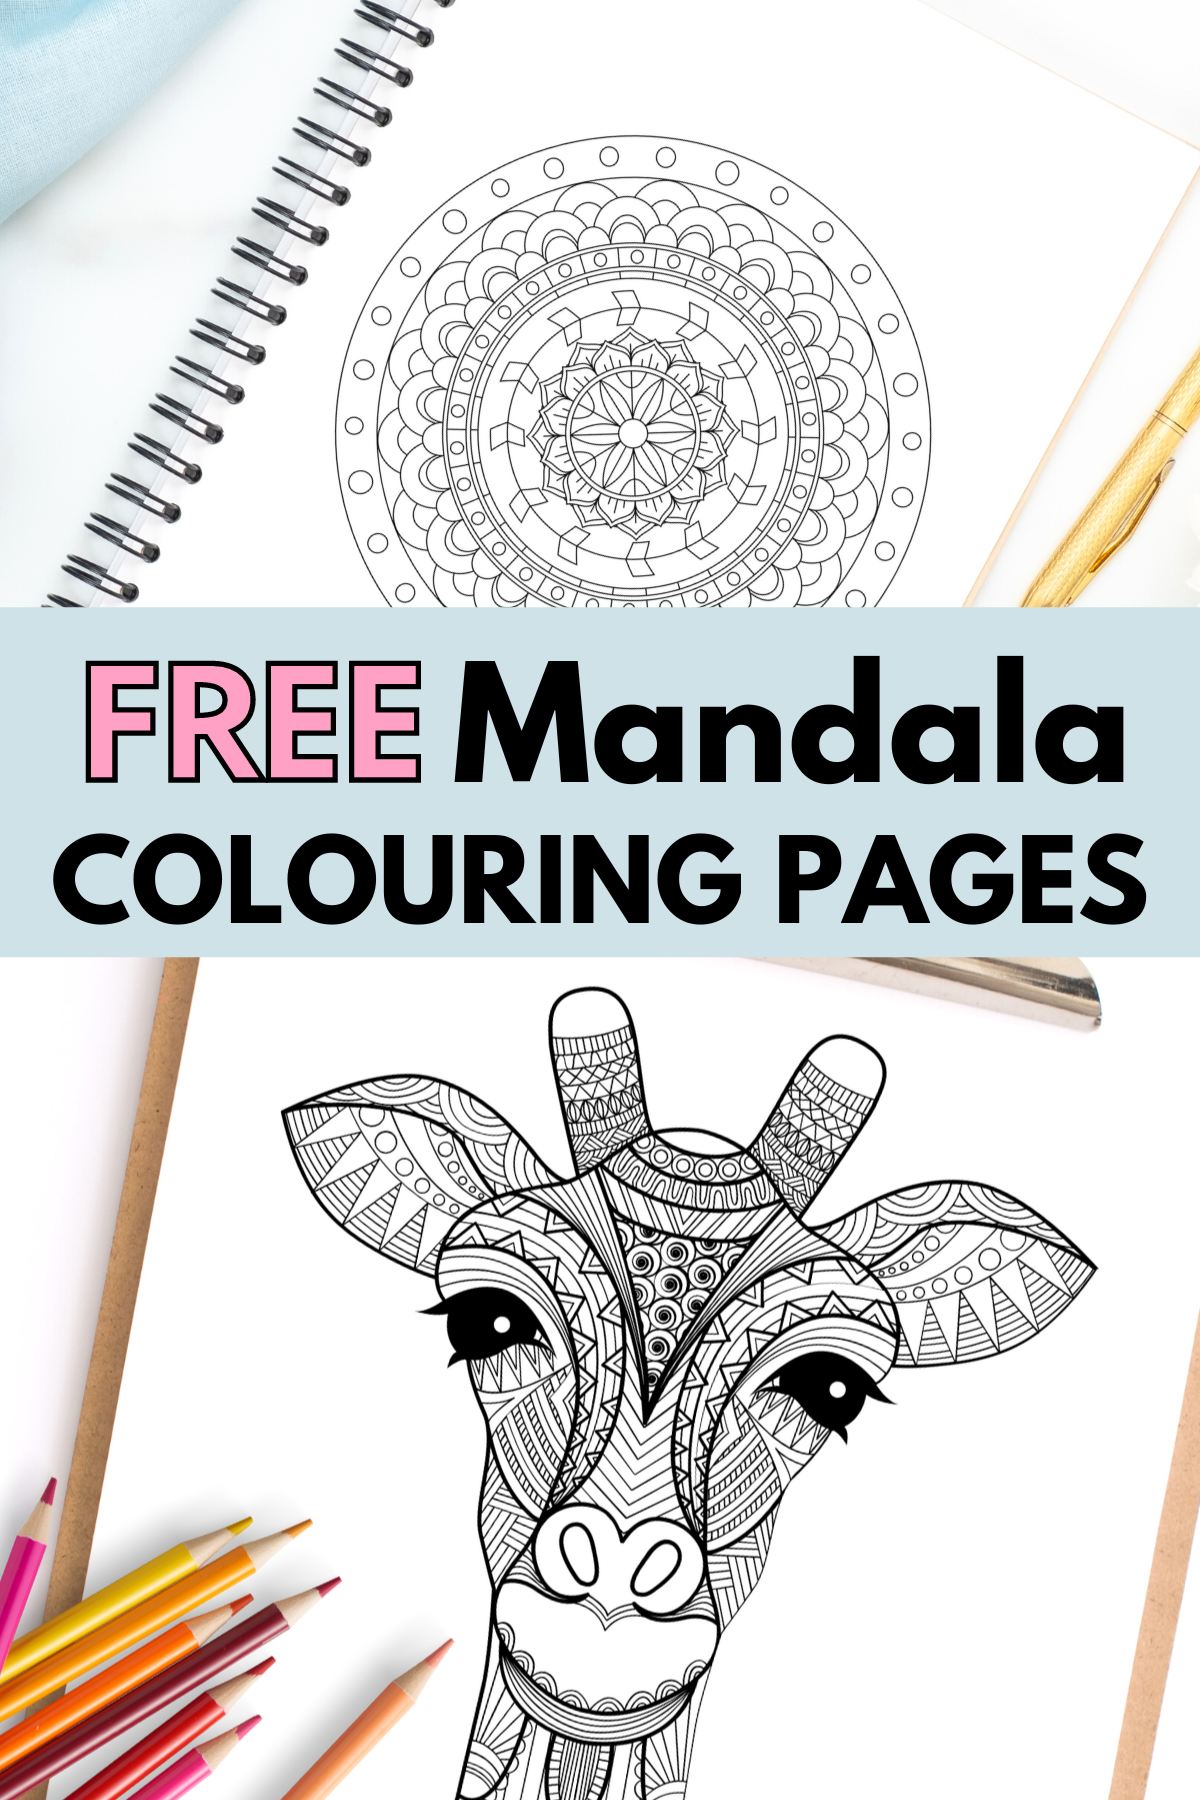 Art Color Therapy Mandalas Coloring Book: The Mandala Coloring Book Variety  Coloring Pages Relaxing Adult Teen Color Challenging Illustrations Calming  (Large Print / Paperback)